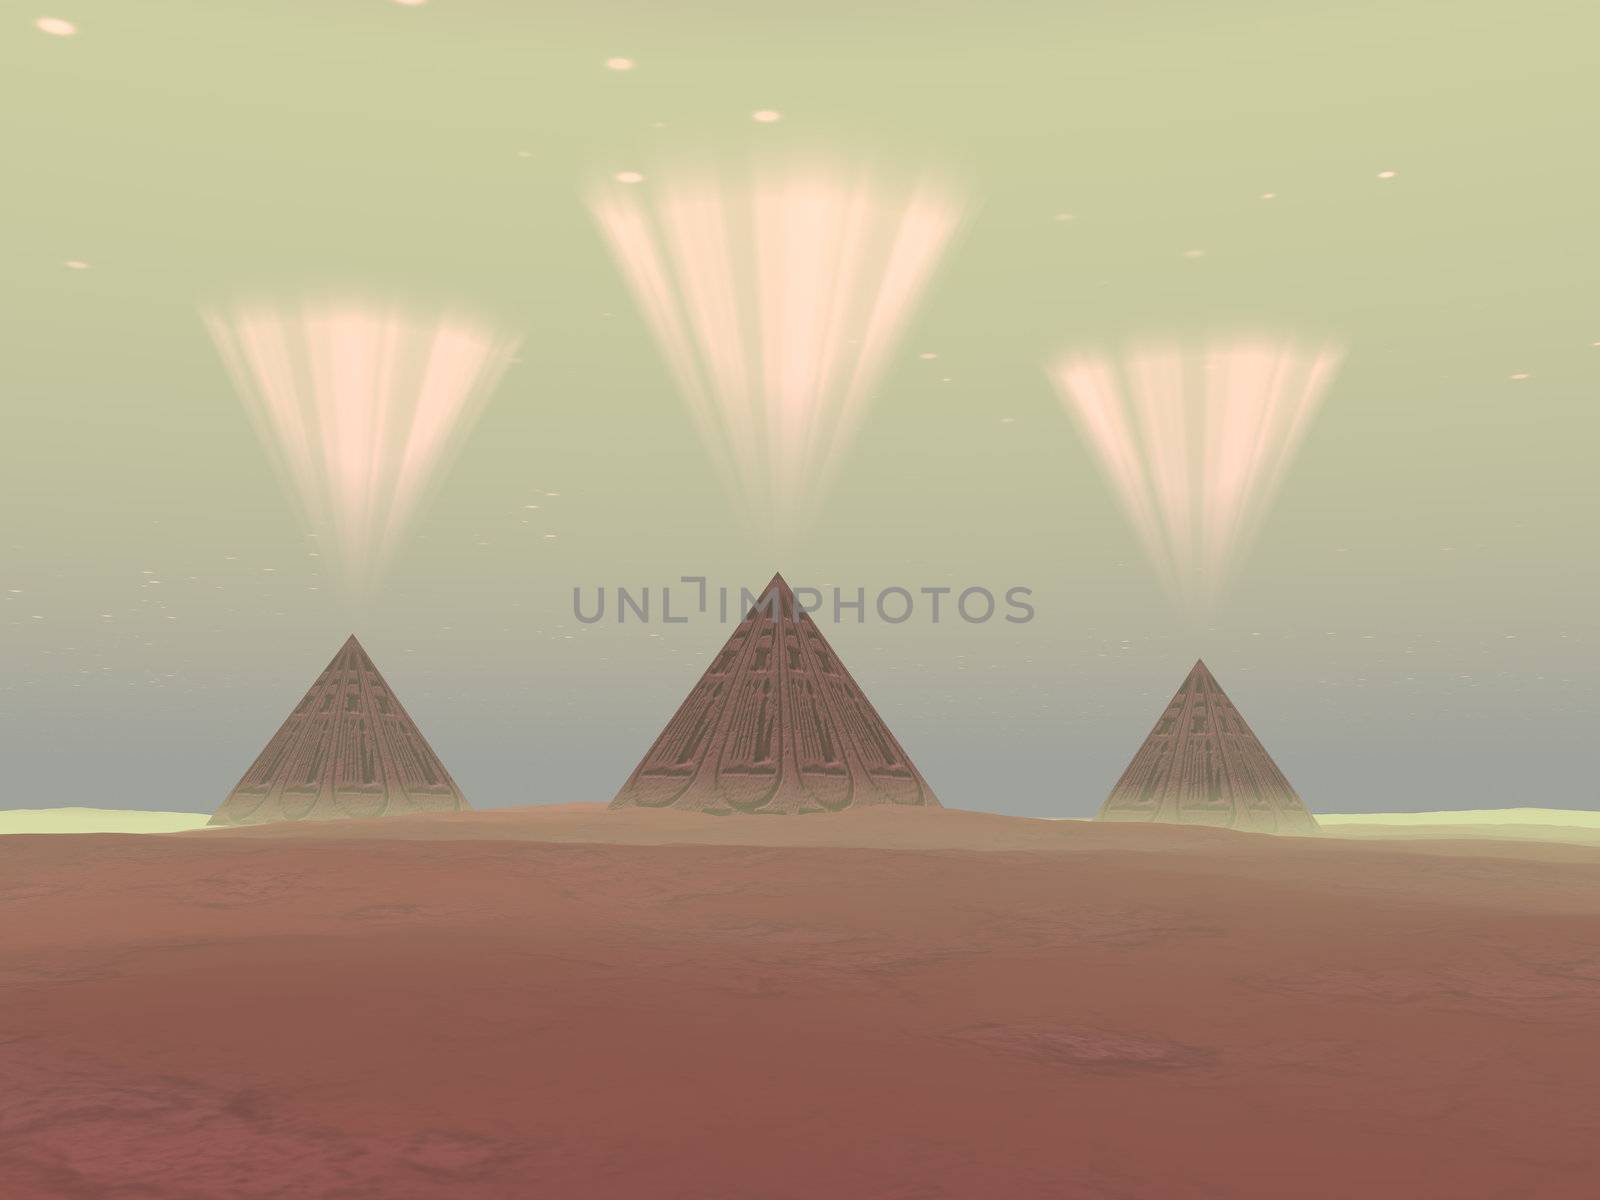 The lights from ancient pyramids join with the stars overhead.